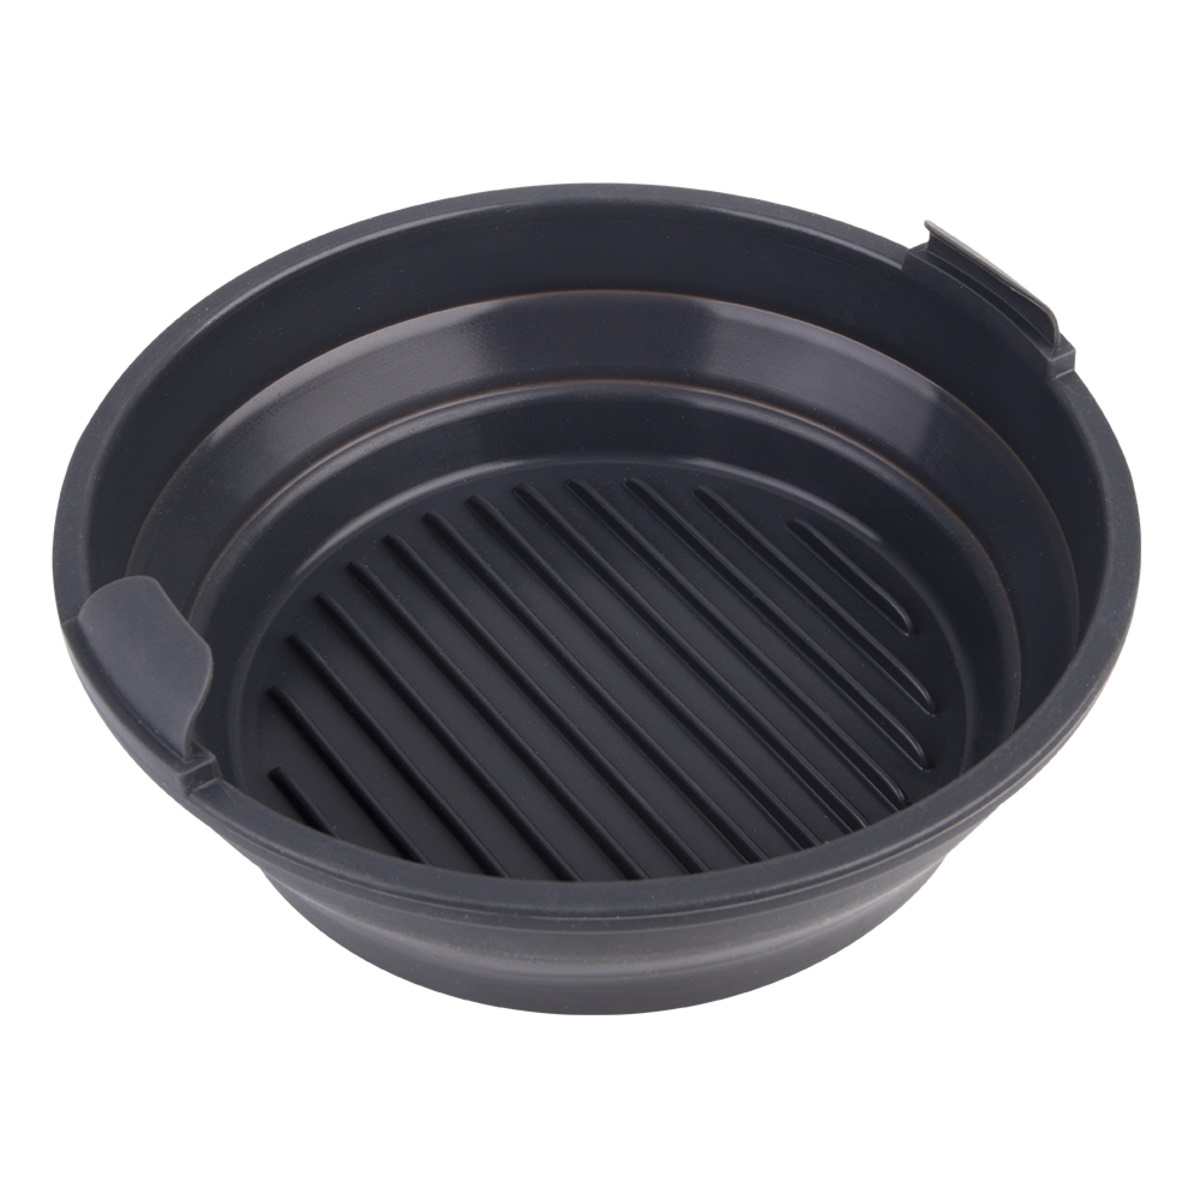 Silicone round collapsible air fryer basket 22cm Dia. (charcoal)